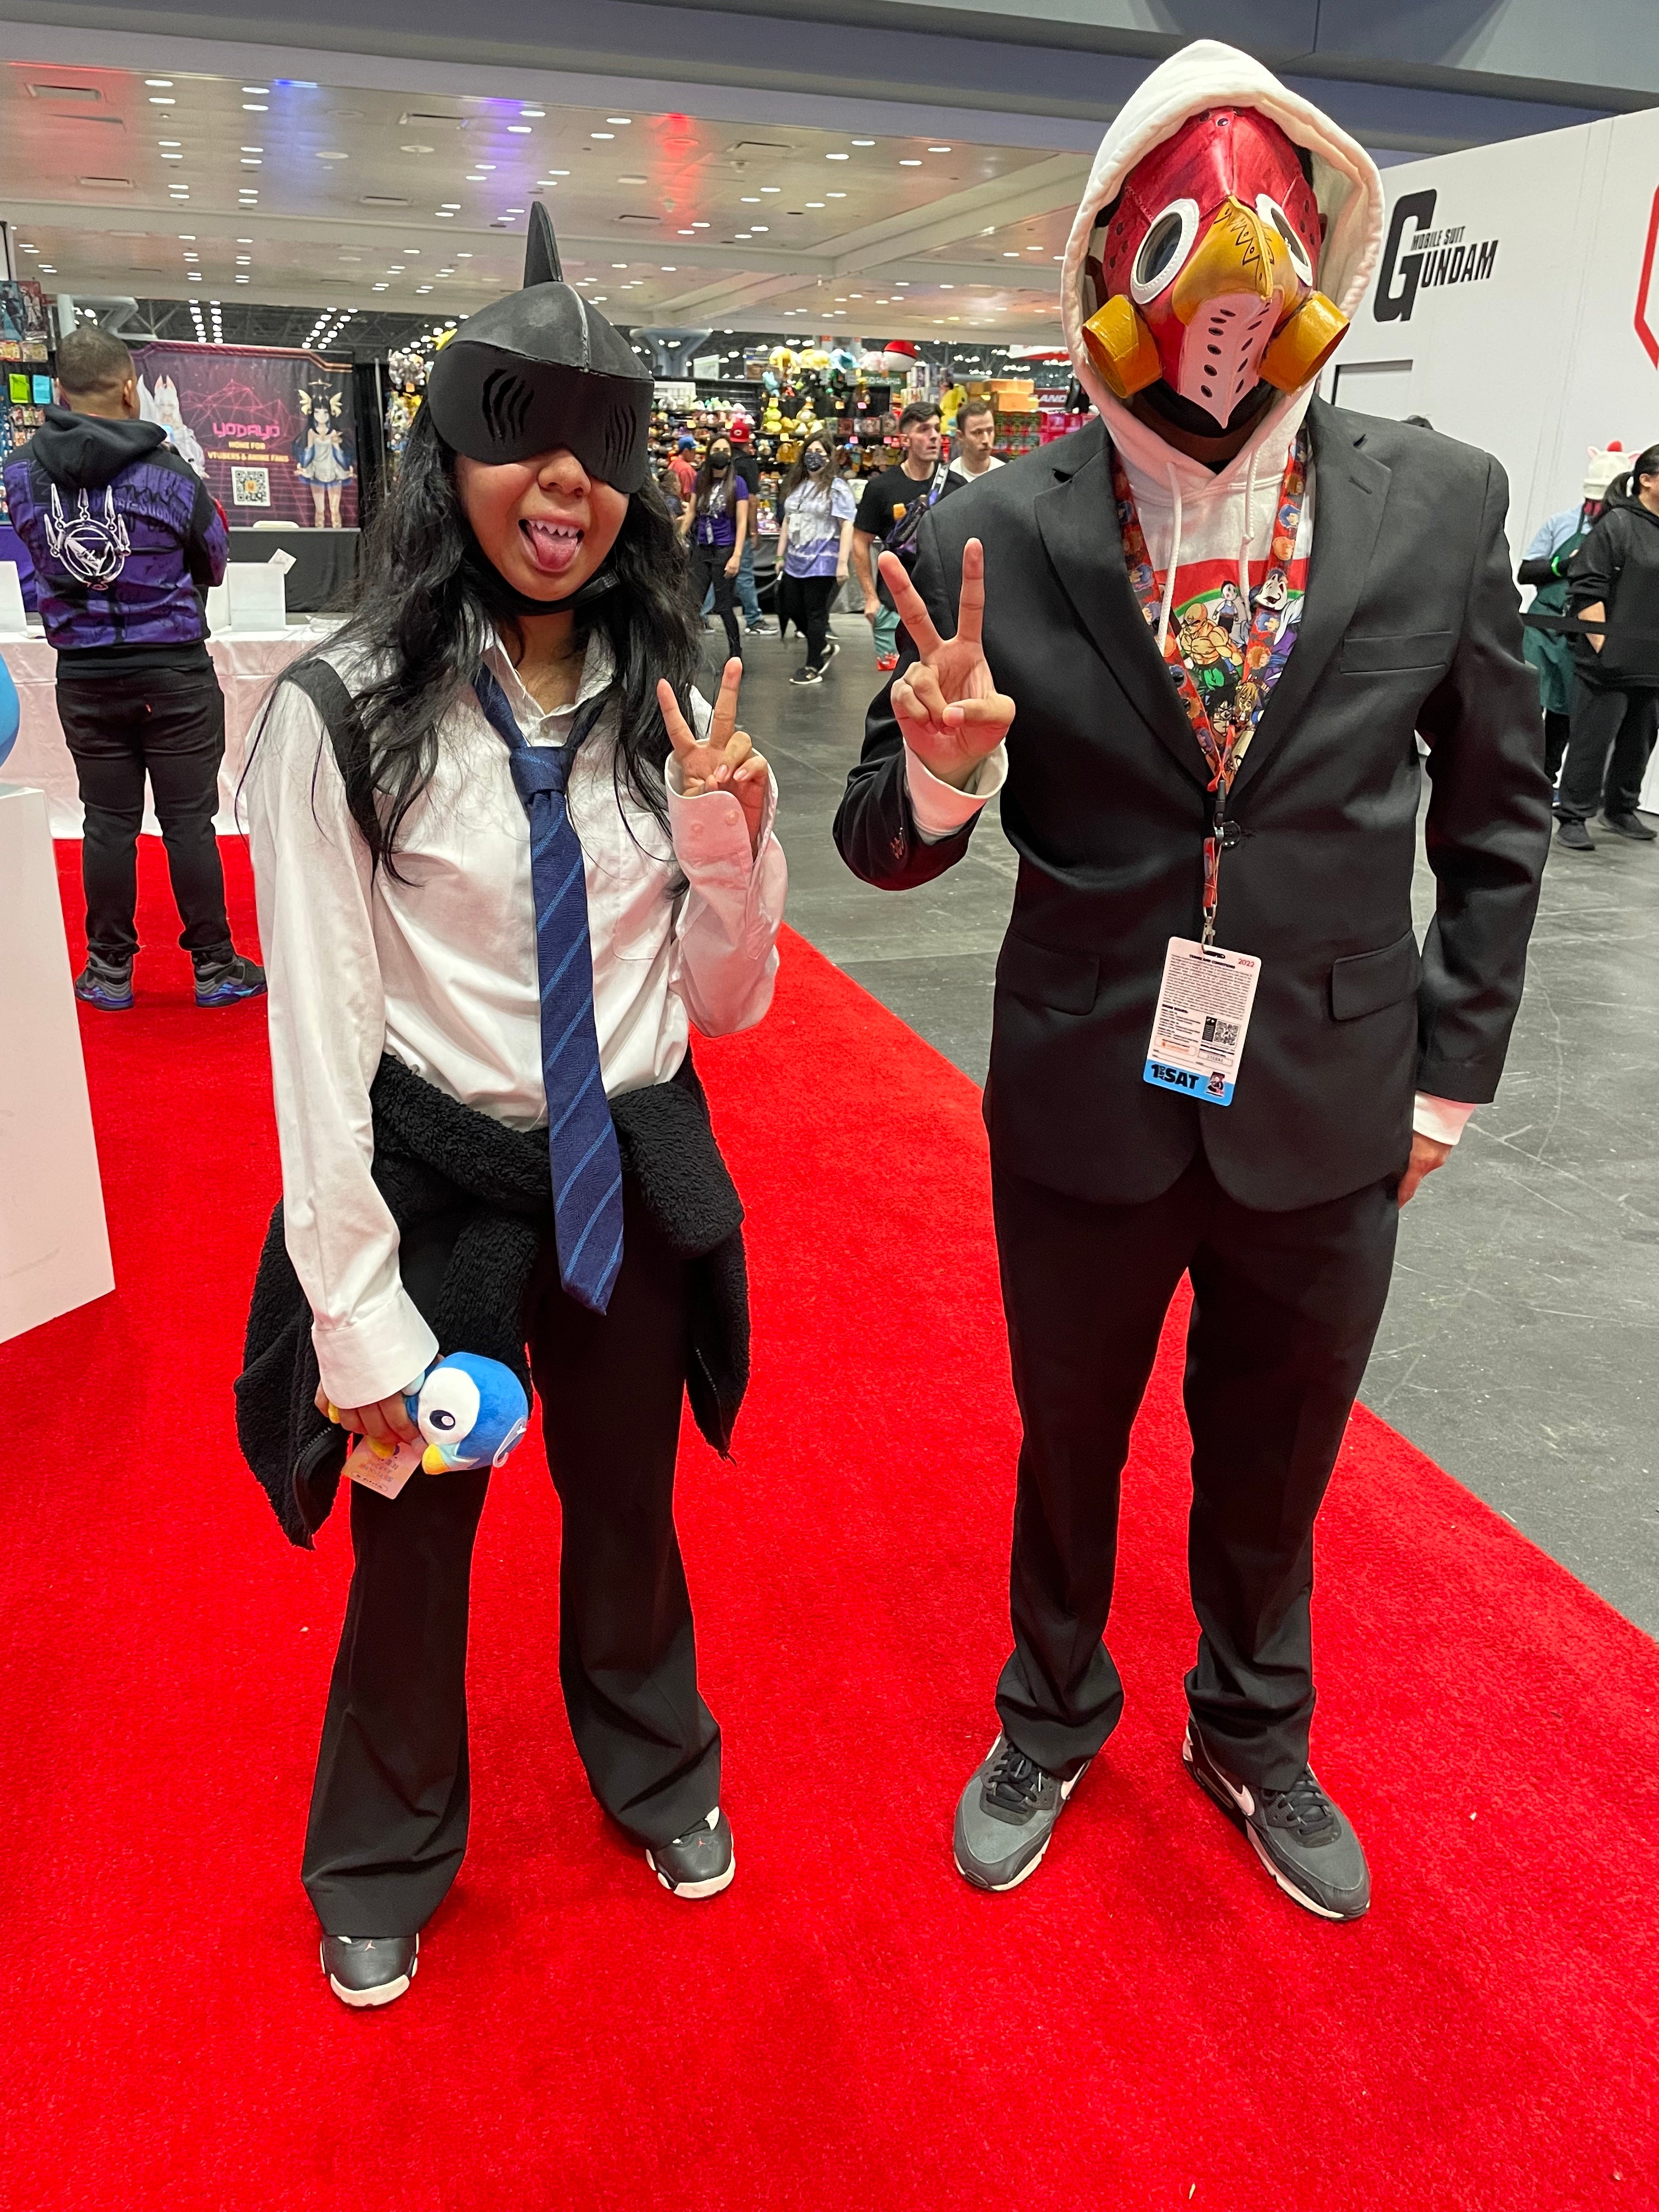 Cosplay at Anime NYC 2022 | Carbon Costume | DIY Guides to Dress Up for  Cosplay & Halloween